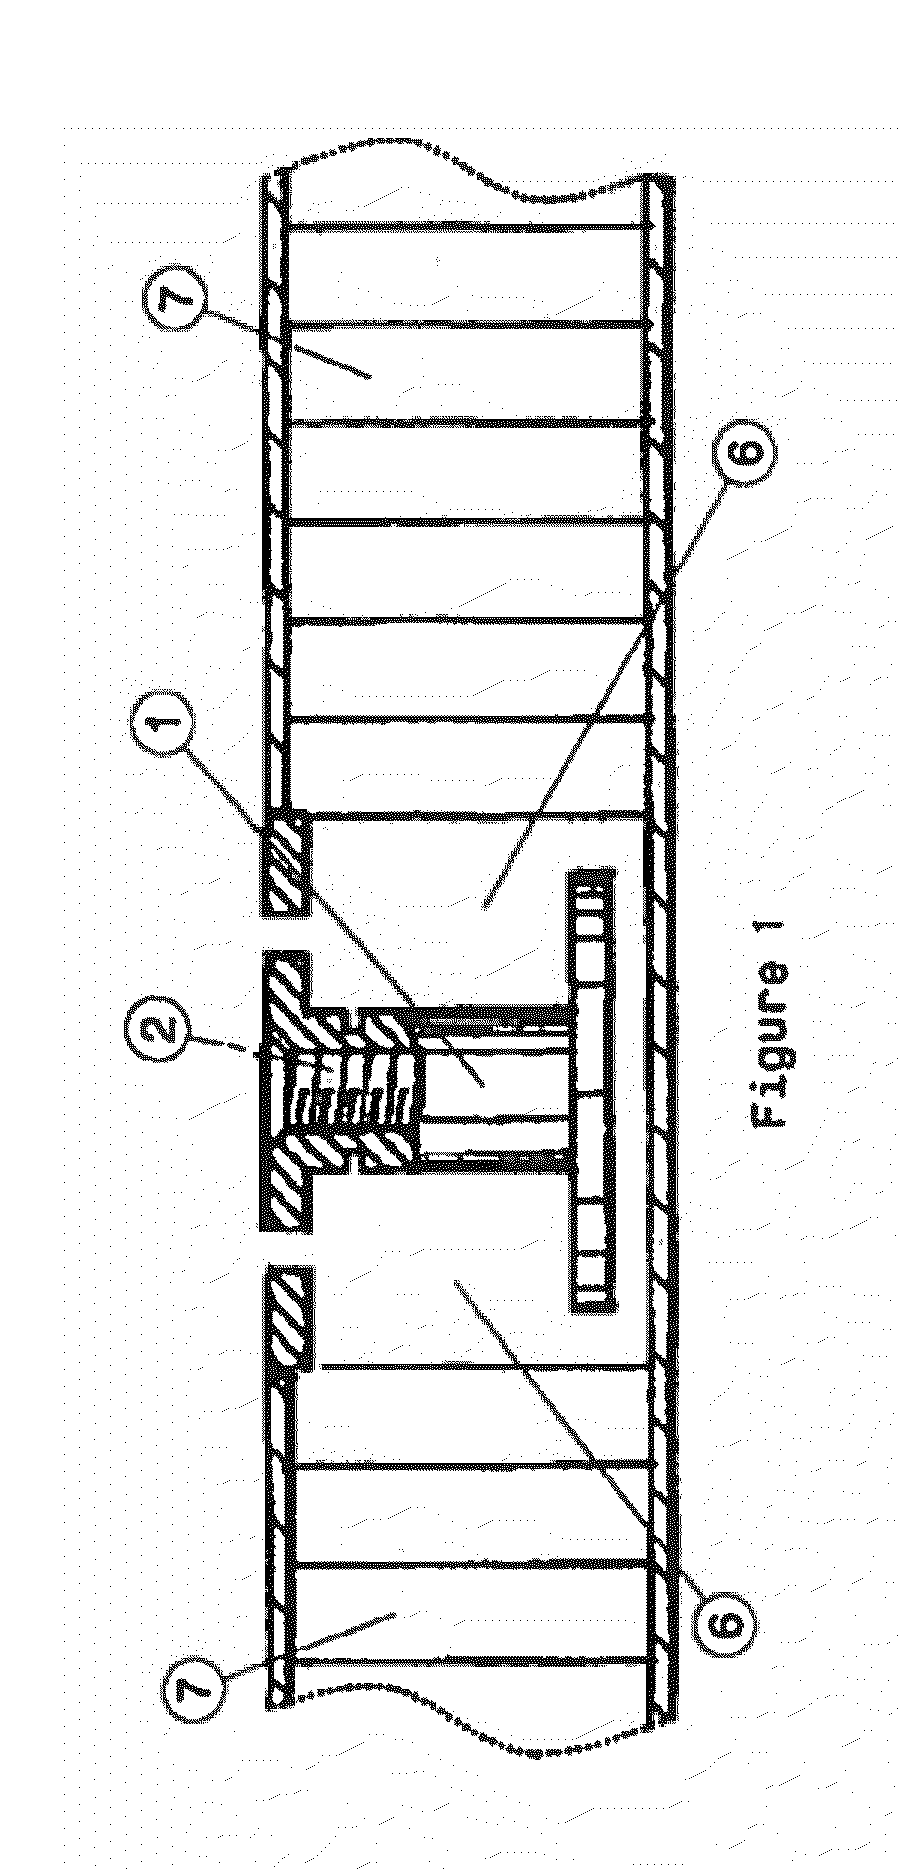 Method and apparatus for adhesion of inserts